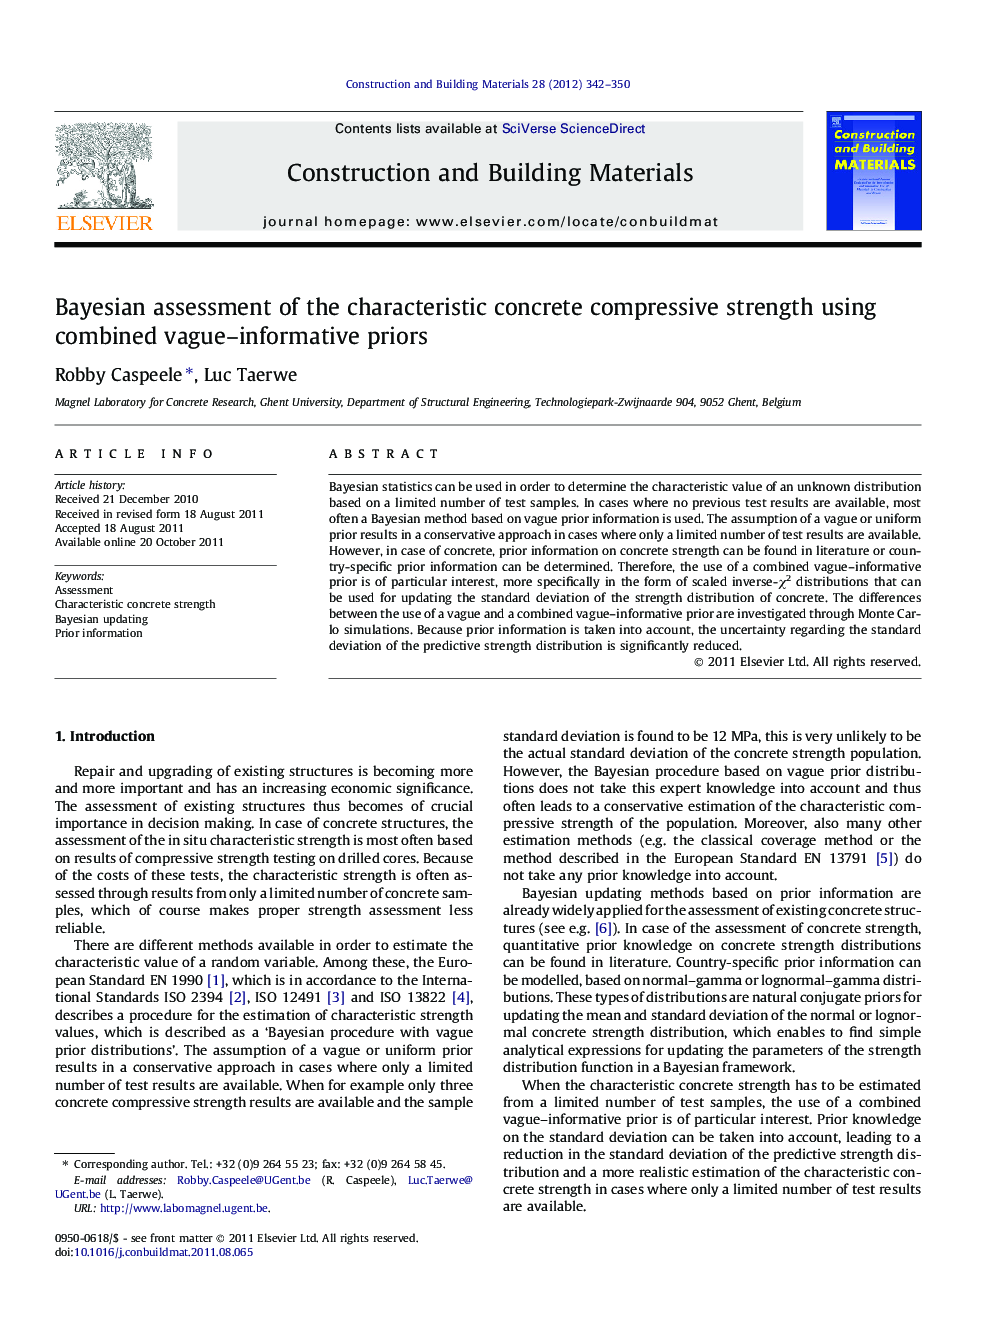 Bayesian assessment of the characteristic concrete compressive strength using combined vague–informative priors